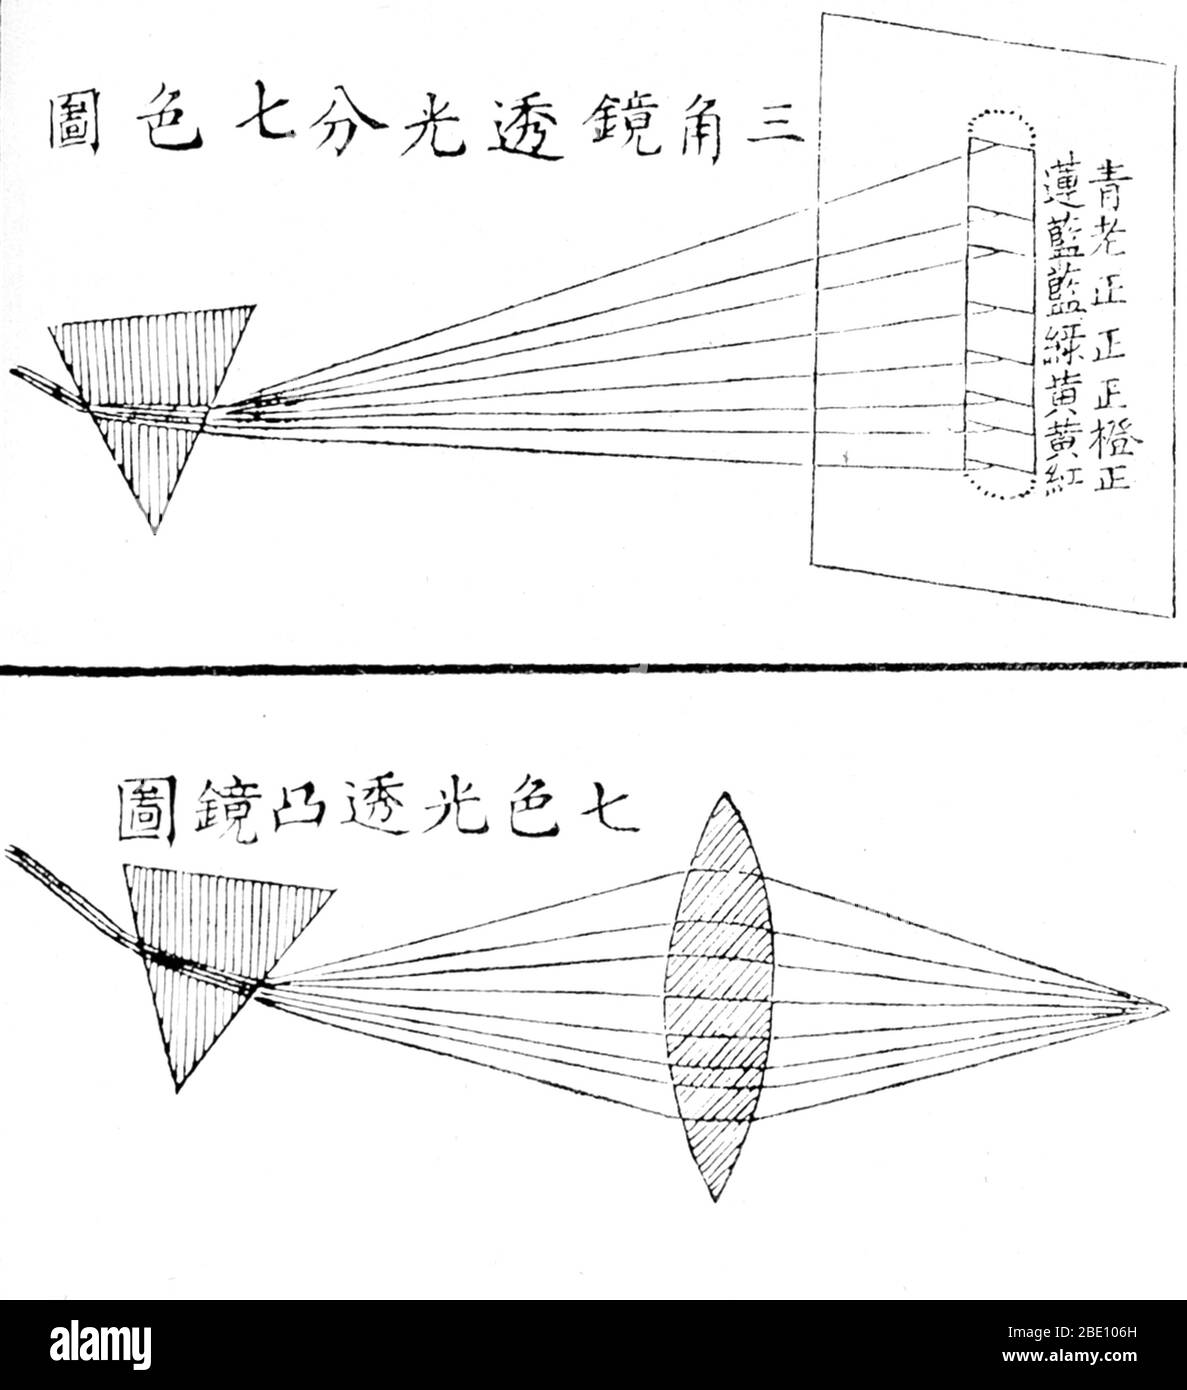 Illustration showing two prisms from the Chinese book Po-wu hsin-pien (Textbook on Natural Sciences) by Benjamin Hobson, 1854. Hobson was an English writer and doctor who practiced and taught medicine in China in the 1850s. This popular book, Po-wu hsin-pien, was considered a standard introductory work in China on meterology, chemistry, physics, astronomy, georgraphy, and zoology. Stock Photo